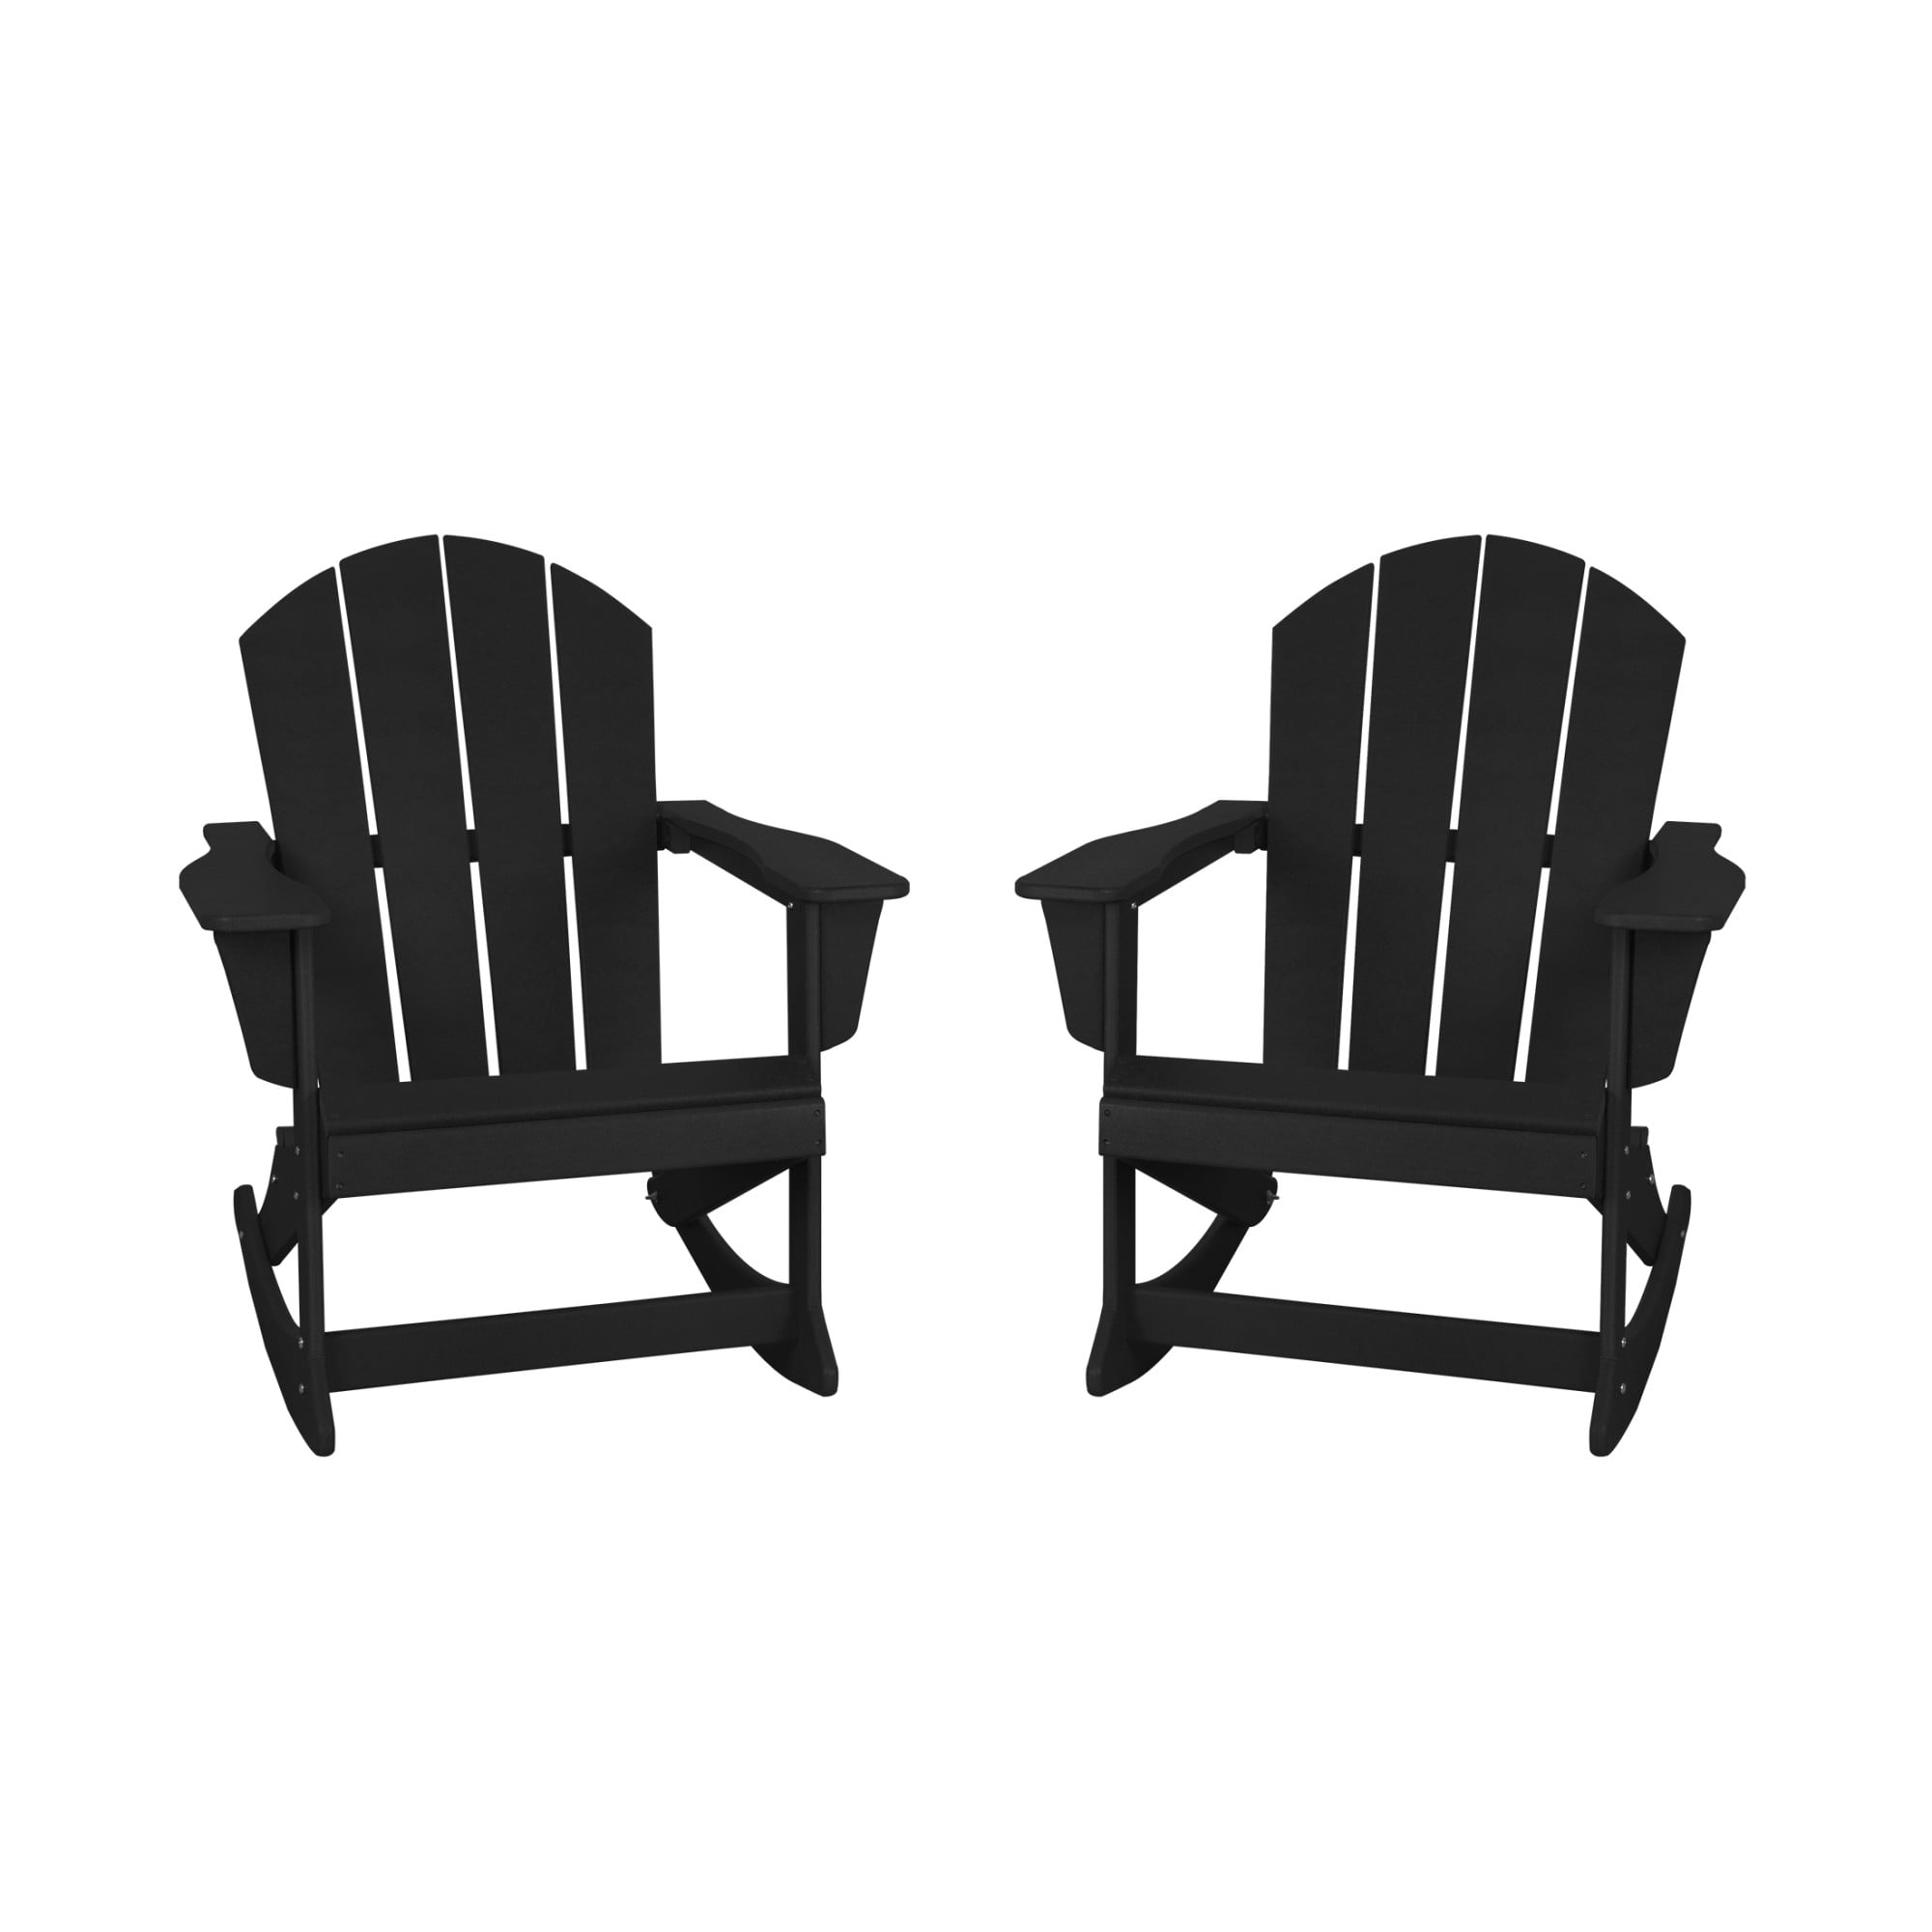 Westintrends Outdoor Rocking Chairs, Black Outdoor Rocking Chairs Set Of 2